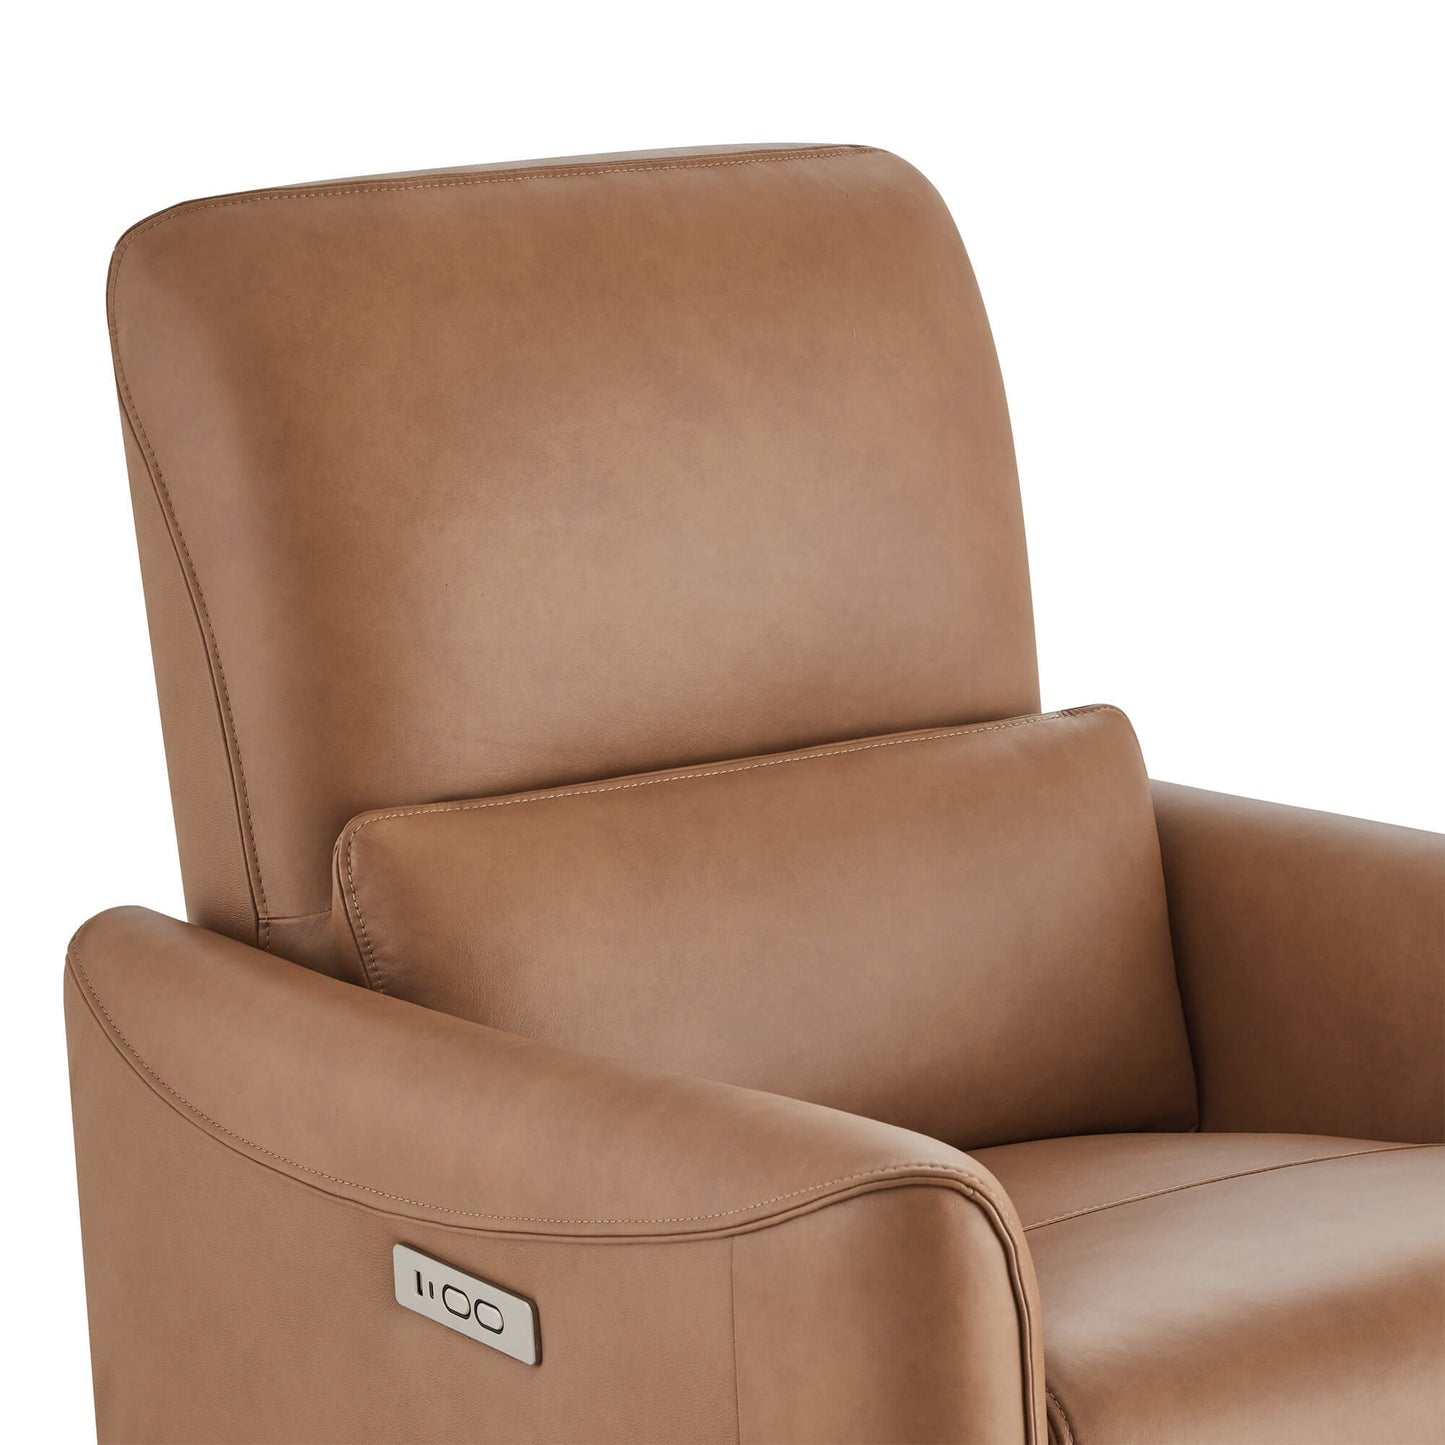 CHITA LIVING-Tracee Modern Power Swivel Glider Recliner-Recliners-Genuine Leather-Saddle Brown-